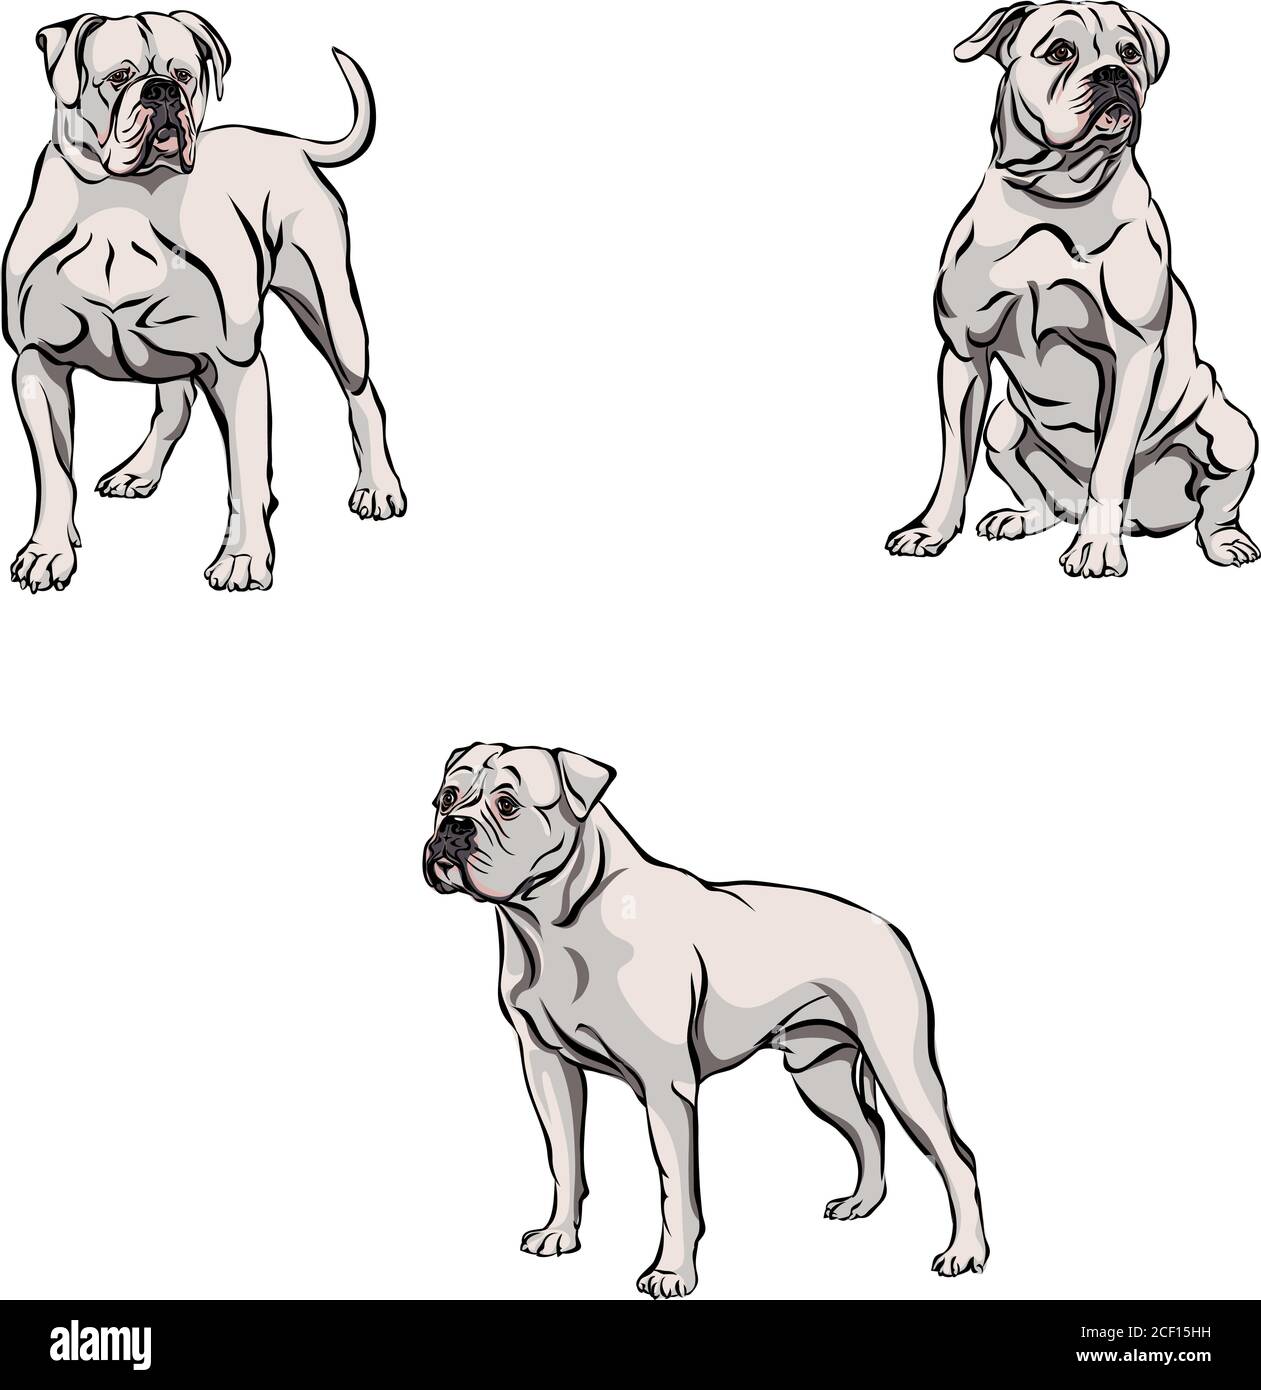 Dog, bulldog in motion, different poses, black, color, various poses, movements and angles of figures, black, silhouette, set, vector, illustration Stock Vector